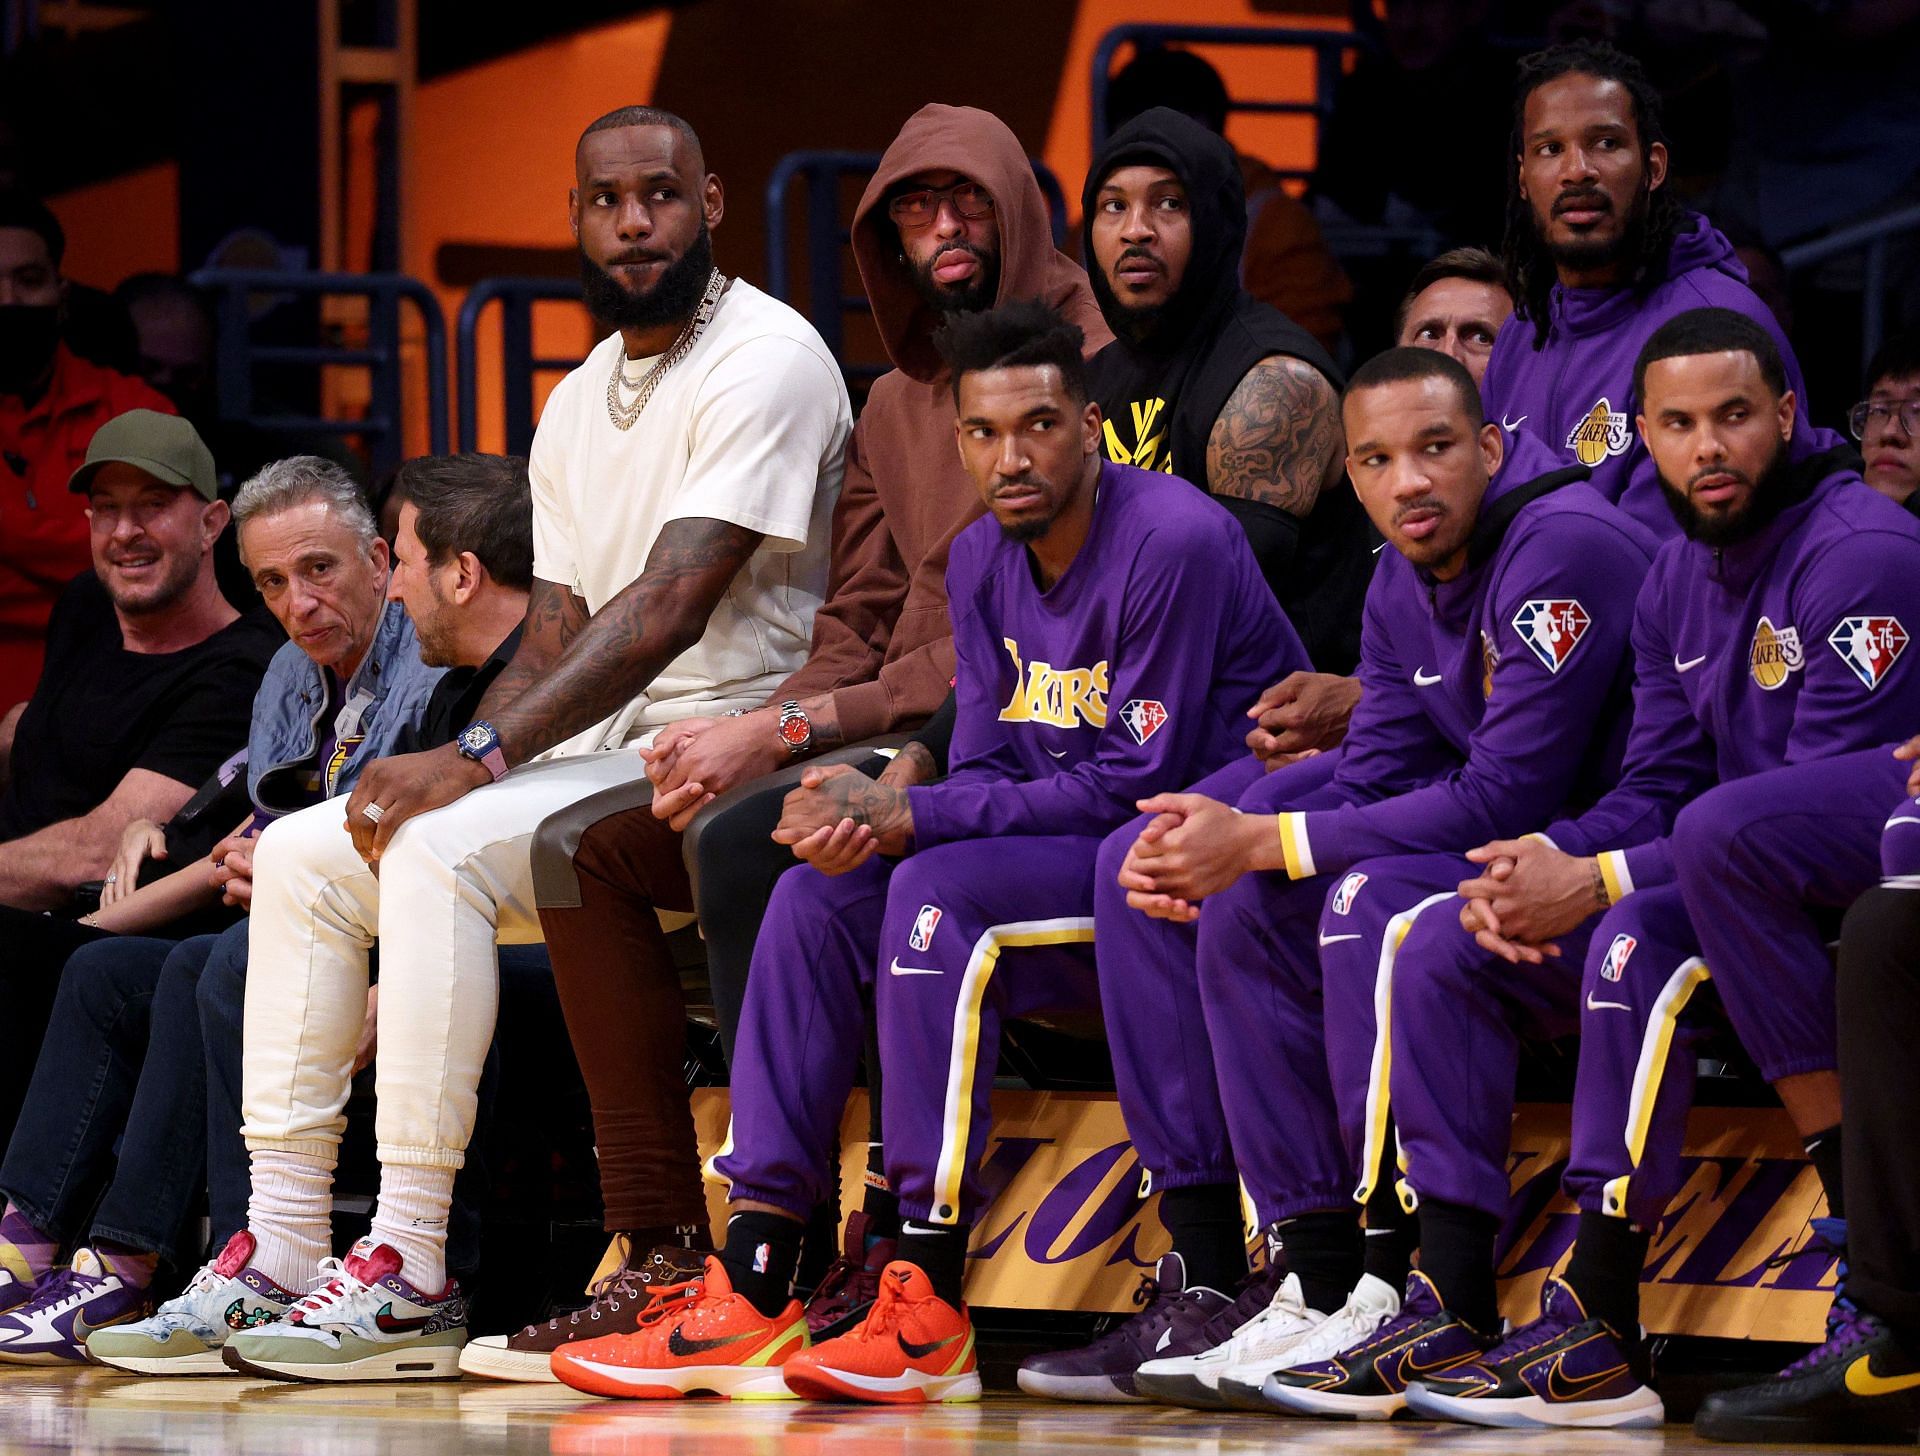 King James sitting with his team watching the Lakers play against the 76ers